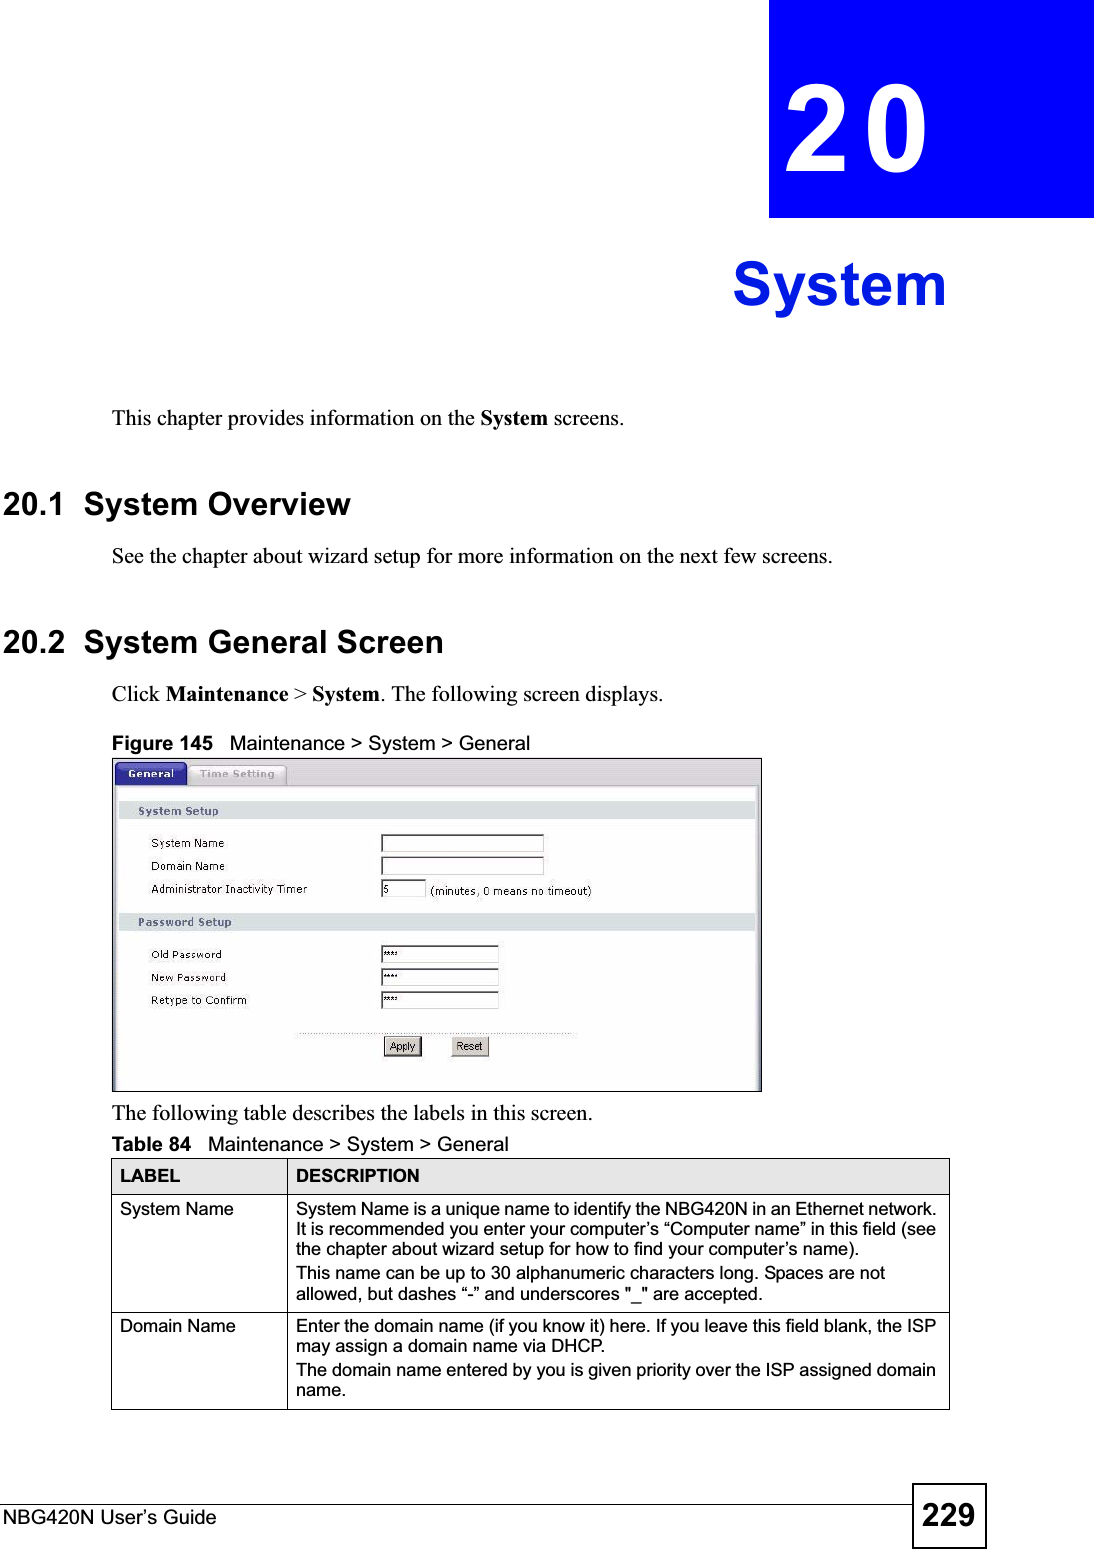 NBG420N User’s Guide 229CHAPTER 20SystemThis chapter provides information on the System screens. 20.1  System OverviewSee the chapter about wizard setup for more information on the next few screens.20.2  System General Screen Click Maintenance &gt; System. The following screen displays.Figure 145   Maintenance &gt; System &gt; General The following table describes the labels in this screen.Table 84   Maintenance &gt; System &gt; GeneralLABEL DESCRIPTIONSystem Name System Name is a unique name to identify the NBG420N in an Ethernet network. It is recommended you enter your computer’s “Computer name” in this field (seethe chapter about wizard setup for how to find your computer’s name). This name can be up to 30 alphanumeric characters long. Spaces are not allowed, but dashes “-” and underscores &quot;_&quot; are accepted.Domain Name Enter the domain name (if you know it) here. If you leave this field blank, the ISP may assign a domain name via DHCP. The domain name entered by you is given priority over the ISP assigned domain name.